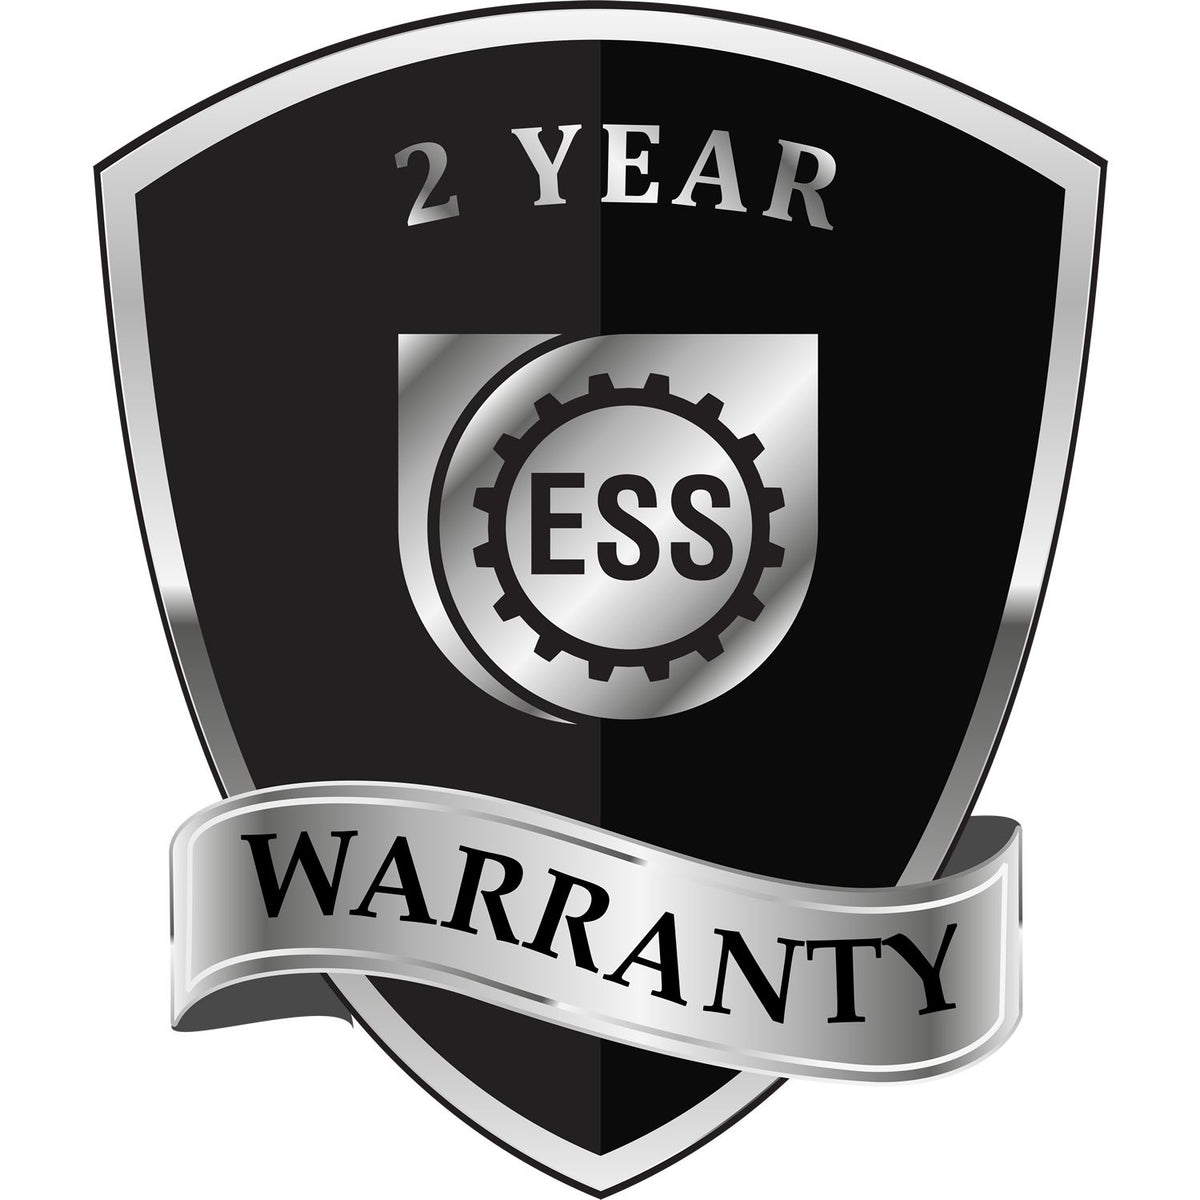 A black and silver badge or emblem showing warranty information for the Gift Massachusetts Landscape Architect Seal